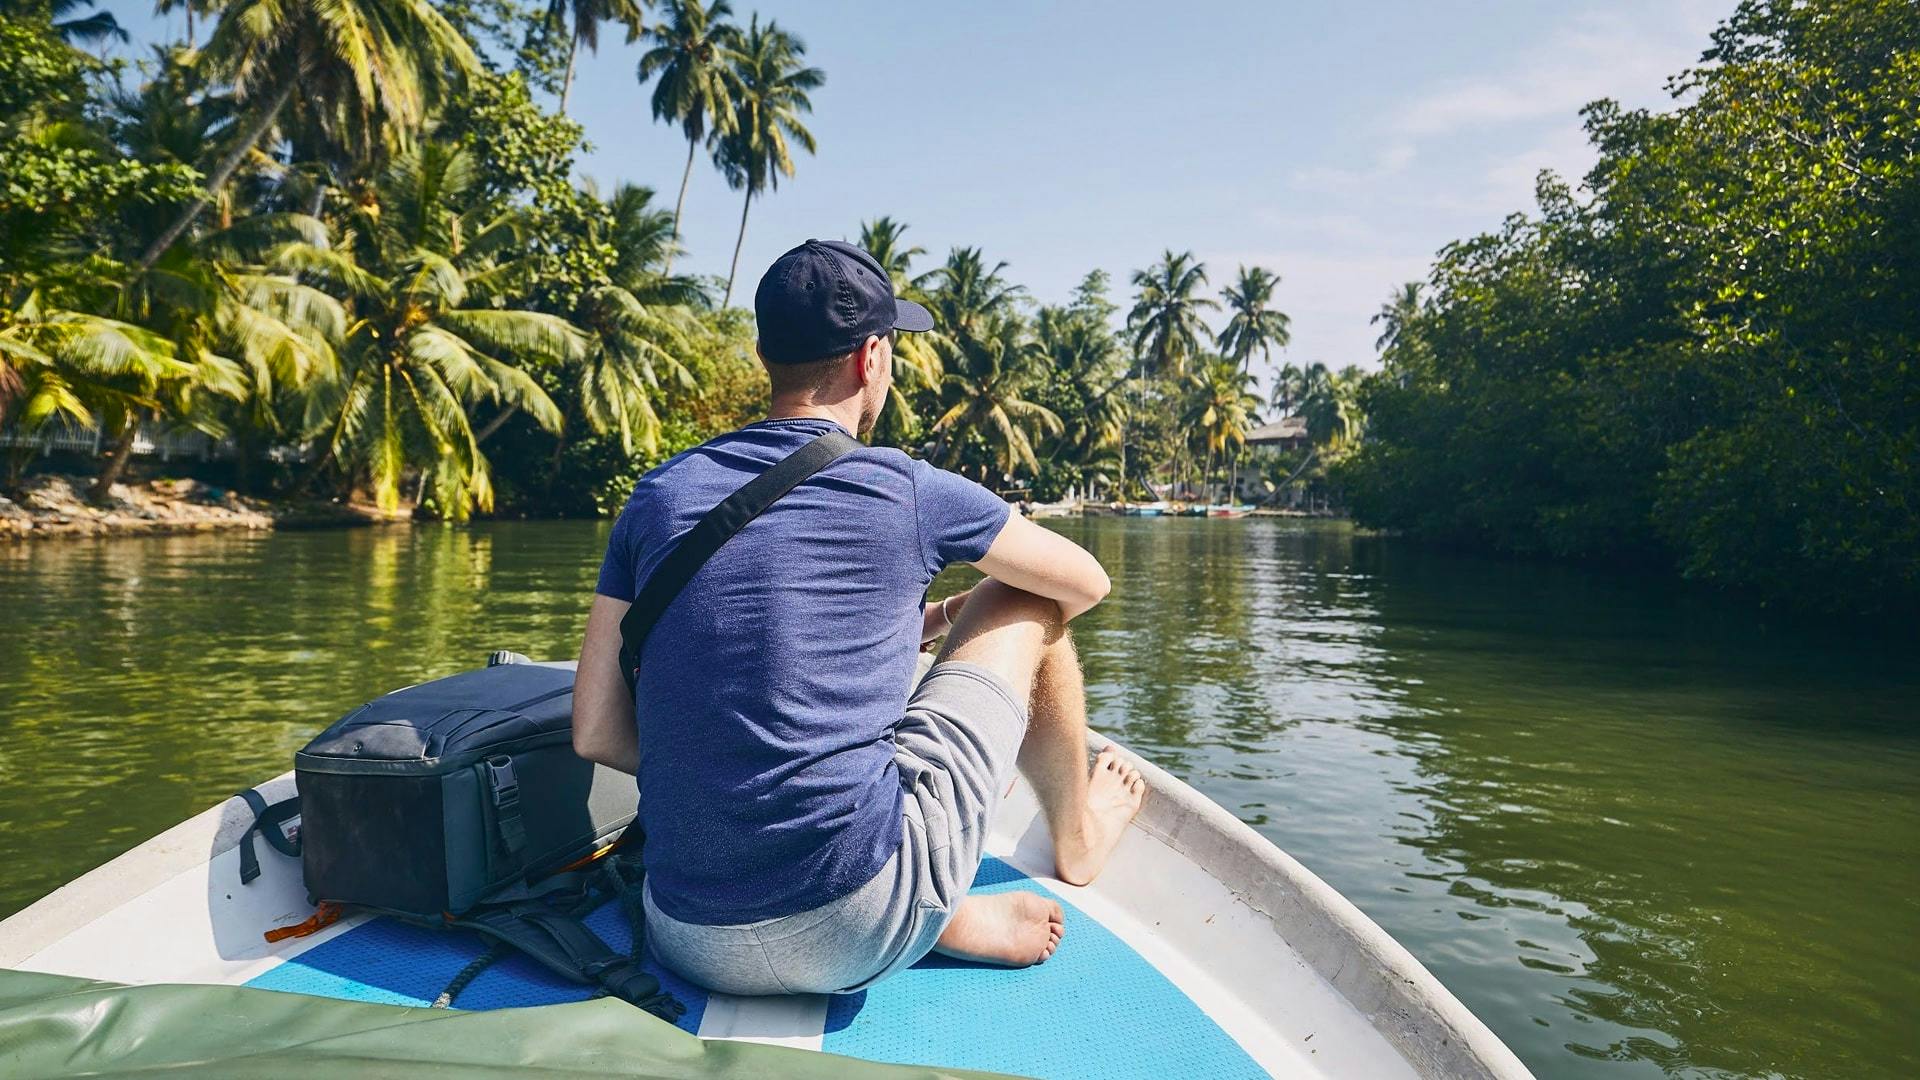 A Boat Tour of the Negombo Lagoon